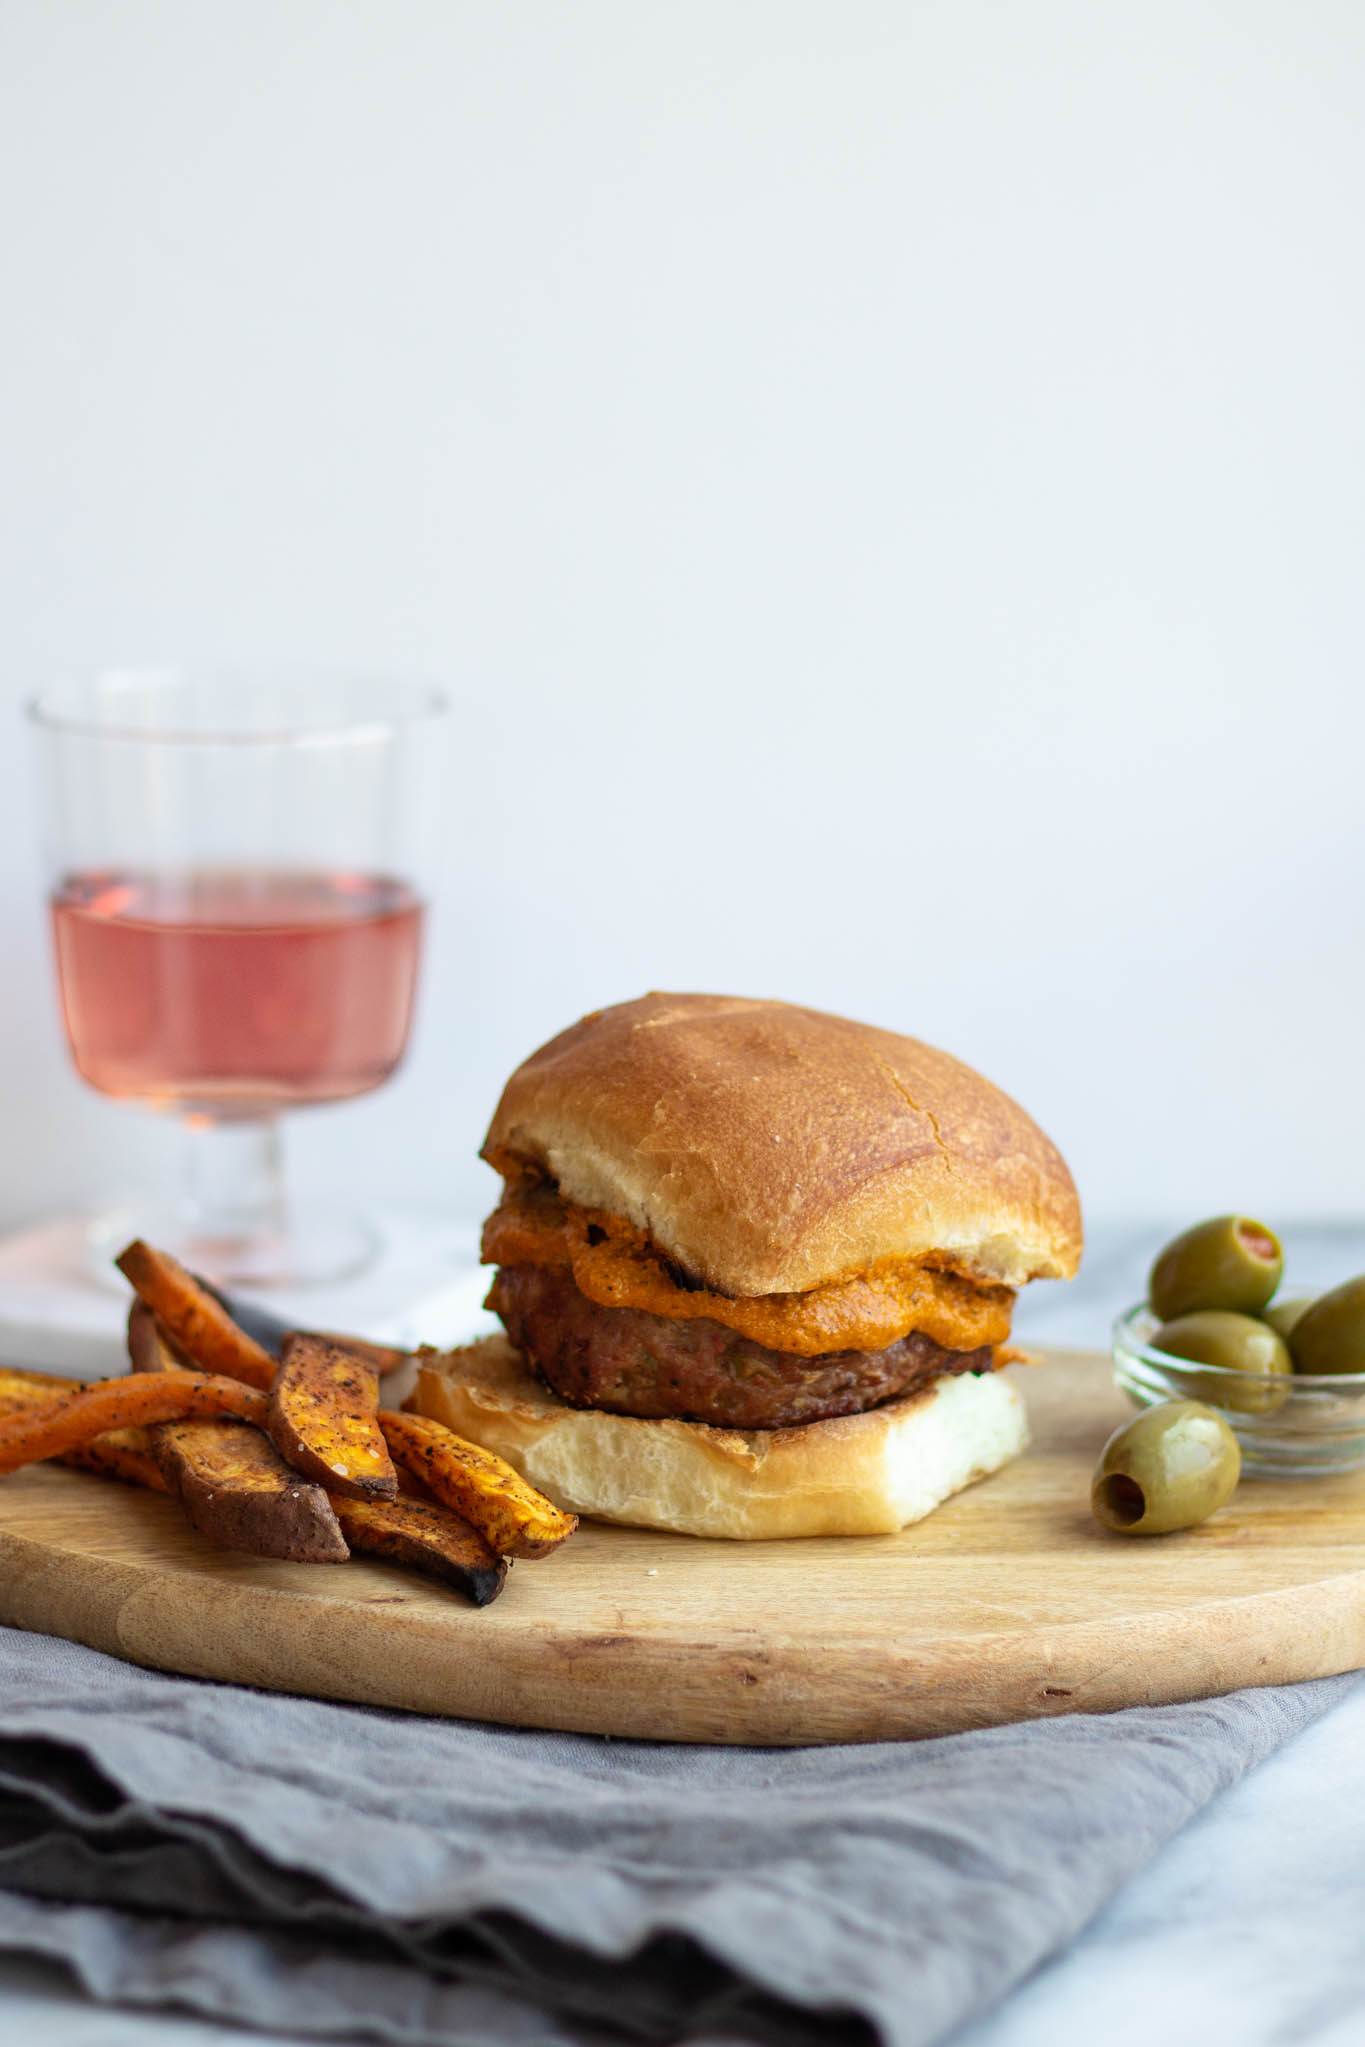 A Spanish Turkey burger on a platter with rosé wine, olives, and sweet potato fries